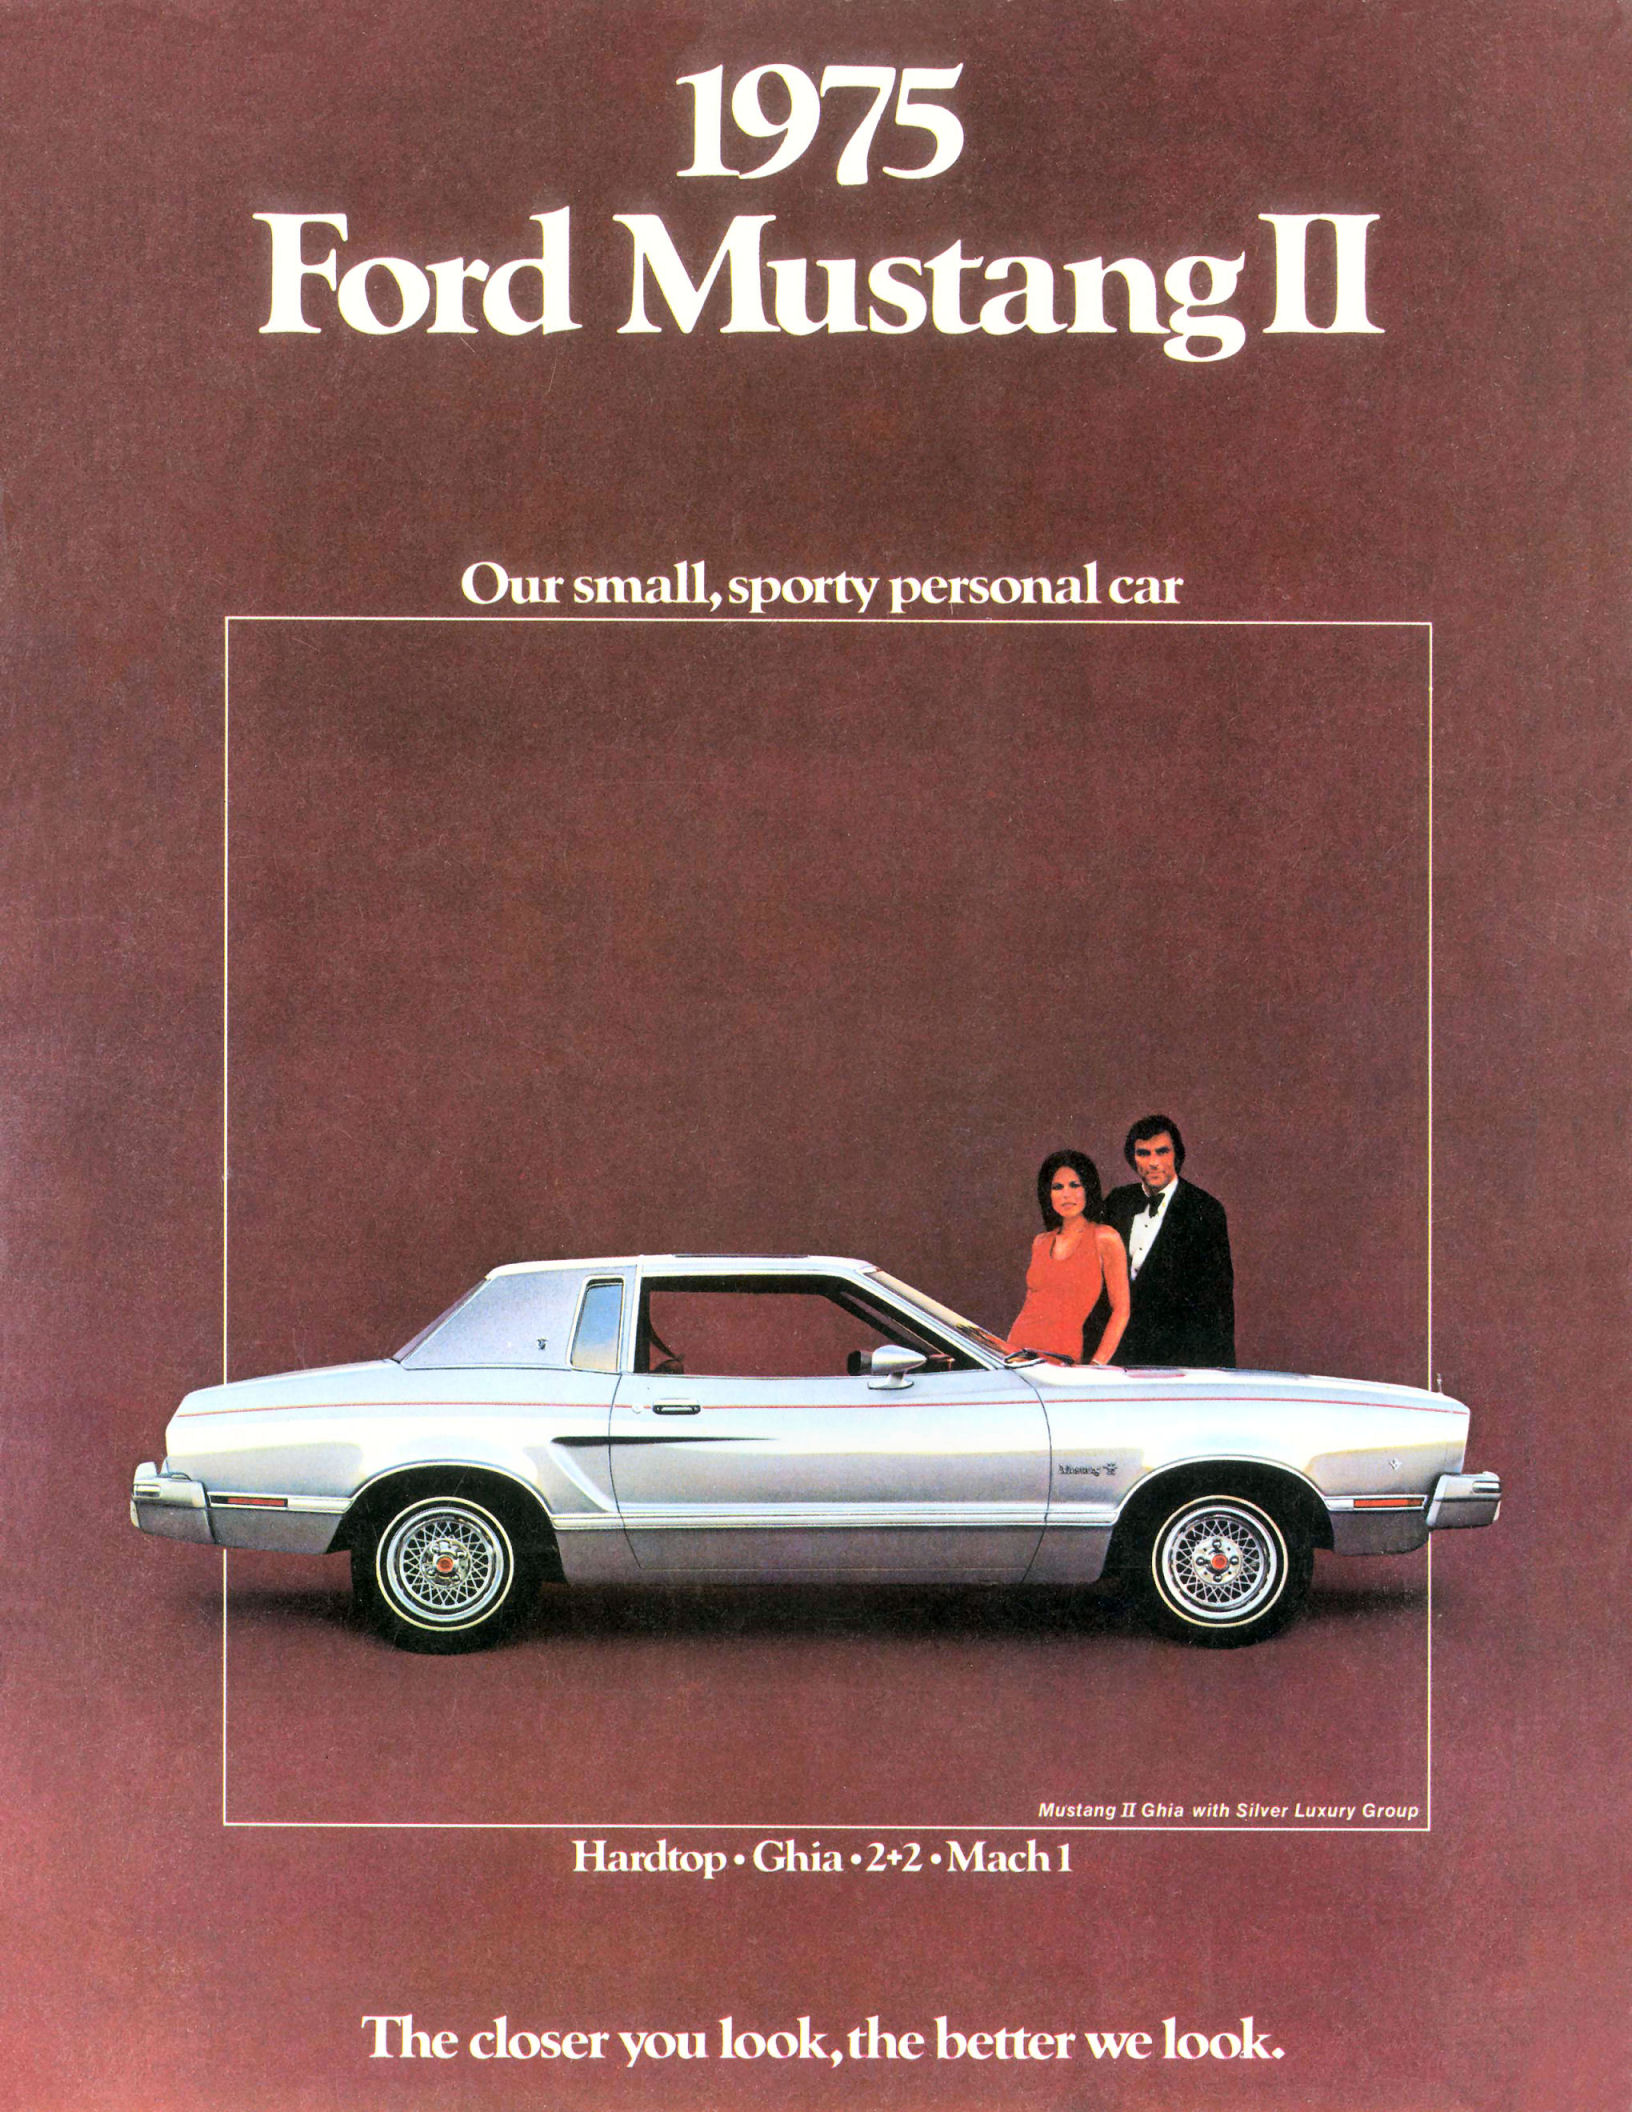 1975_Ford_Mustang_II-01